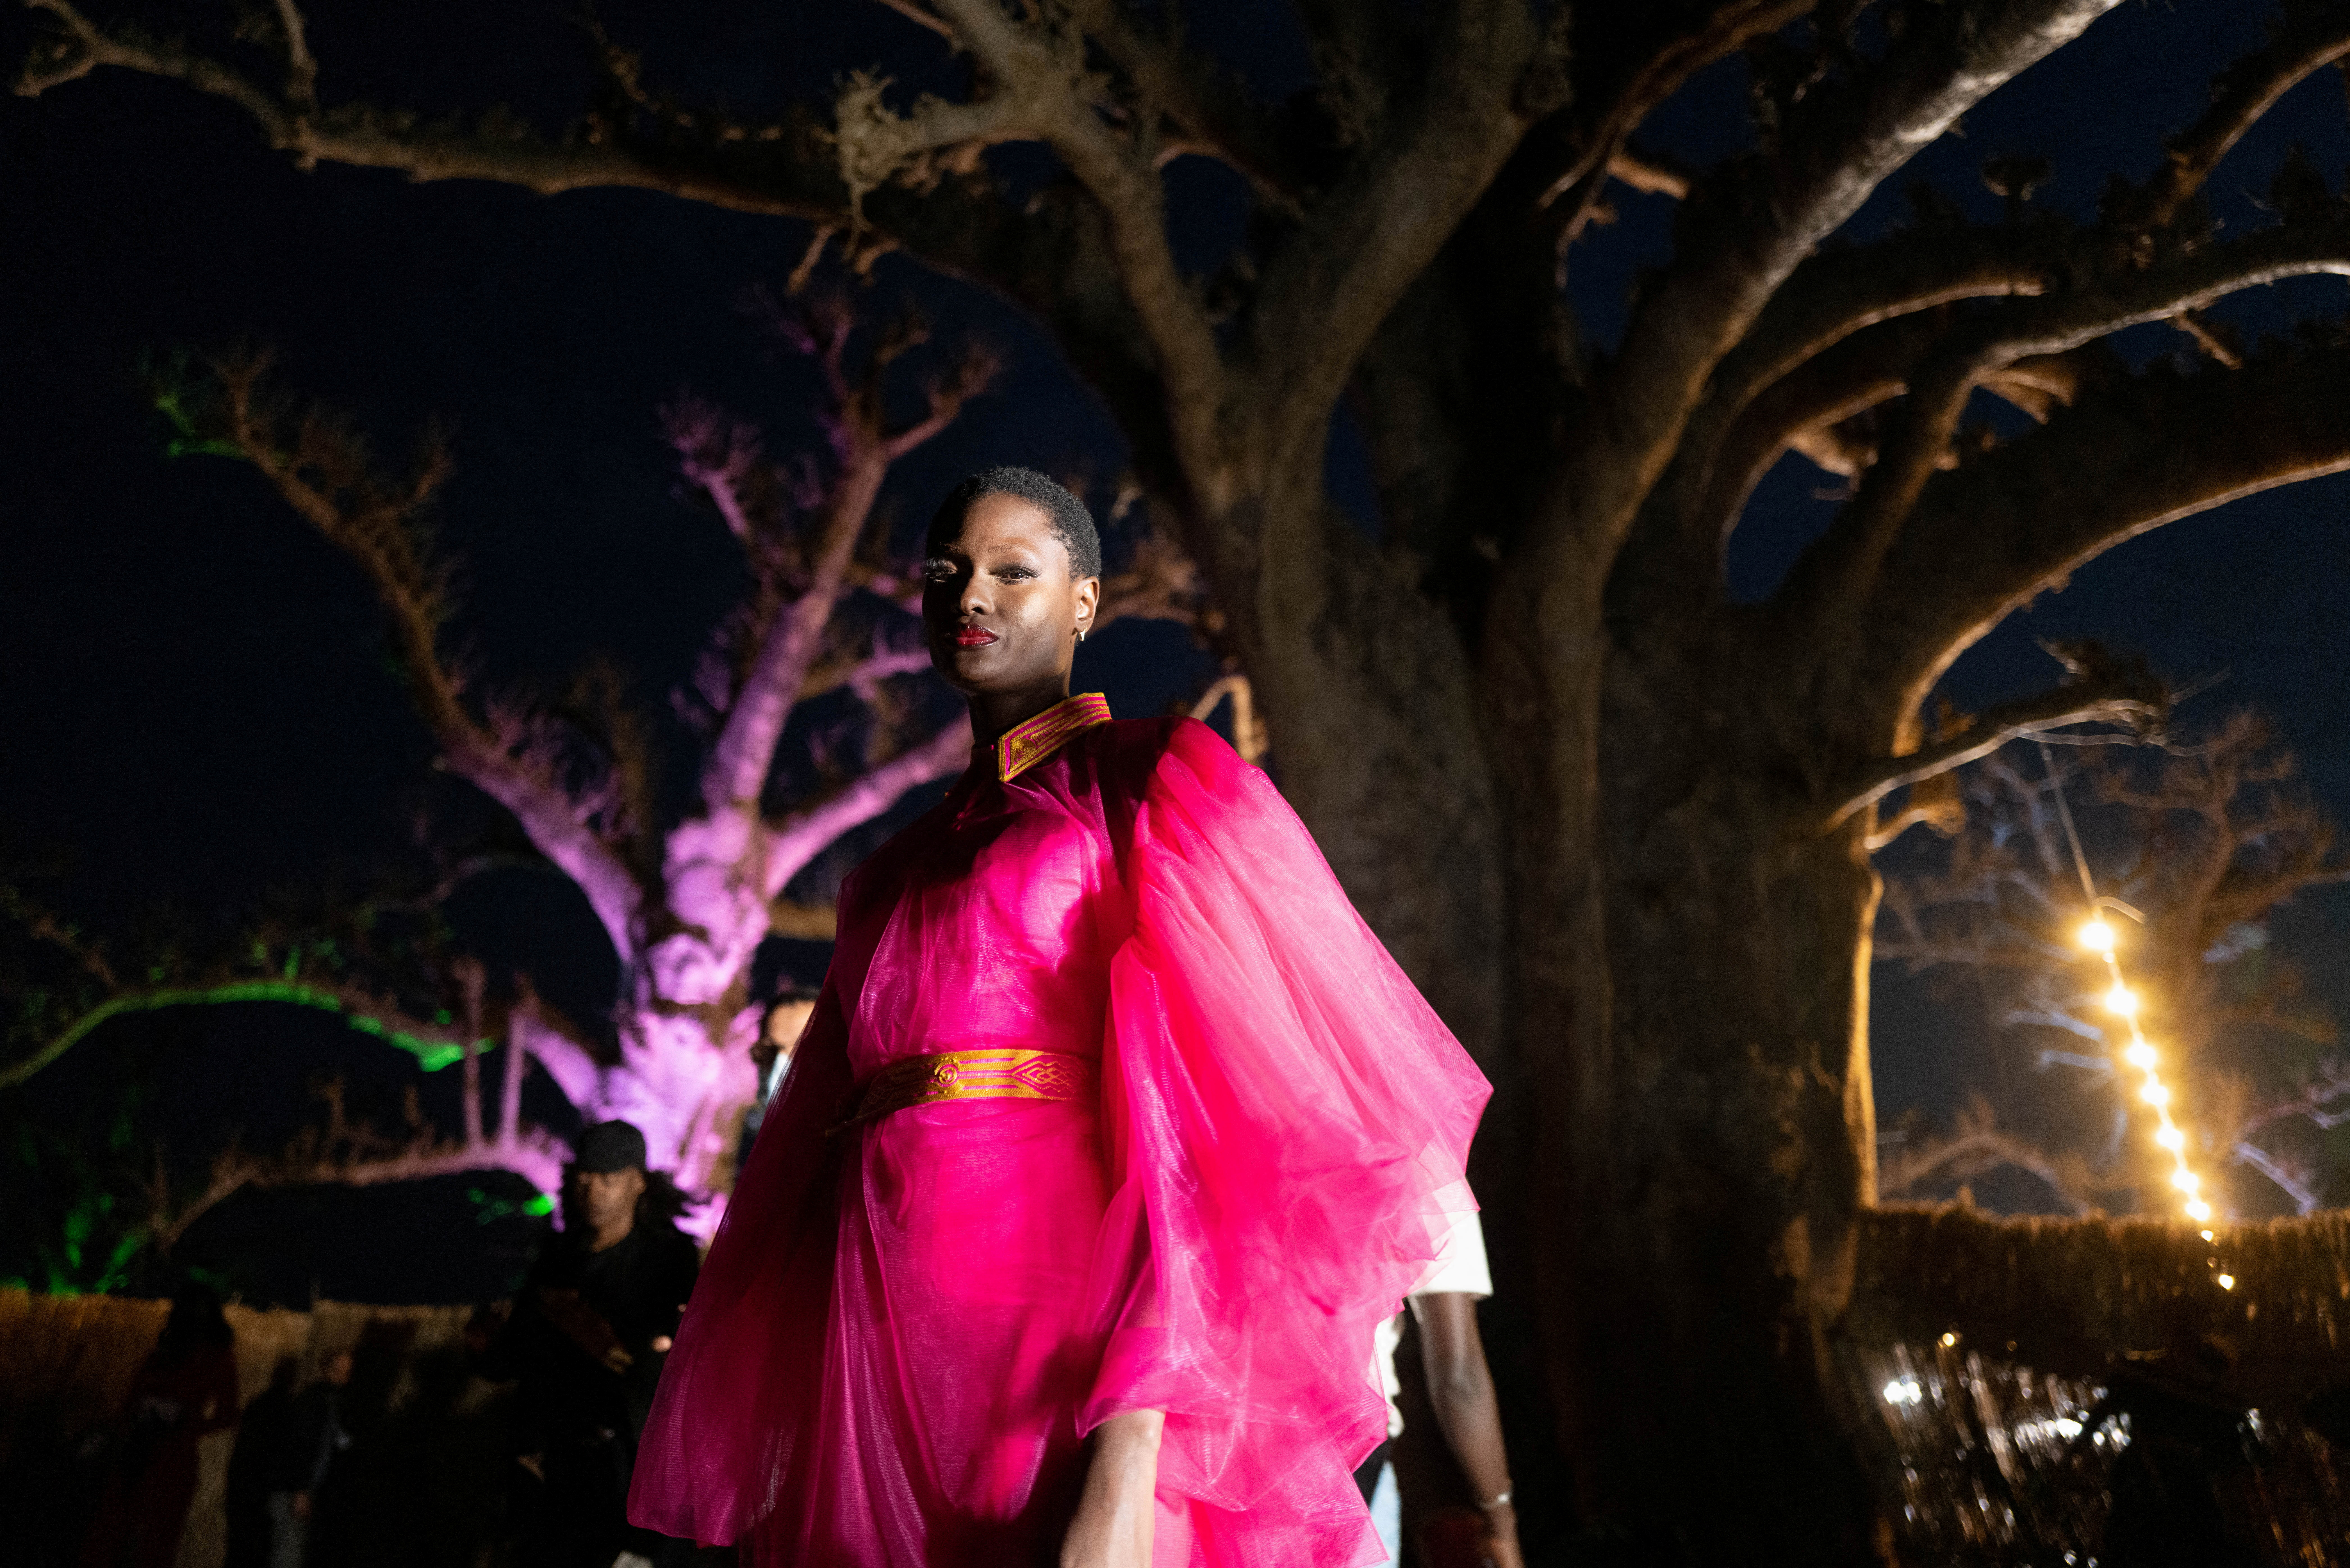 A model waits backstage during the 19th annual Dakar Fashion Week, at the Baobad forest